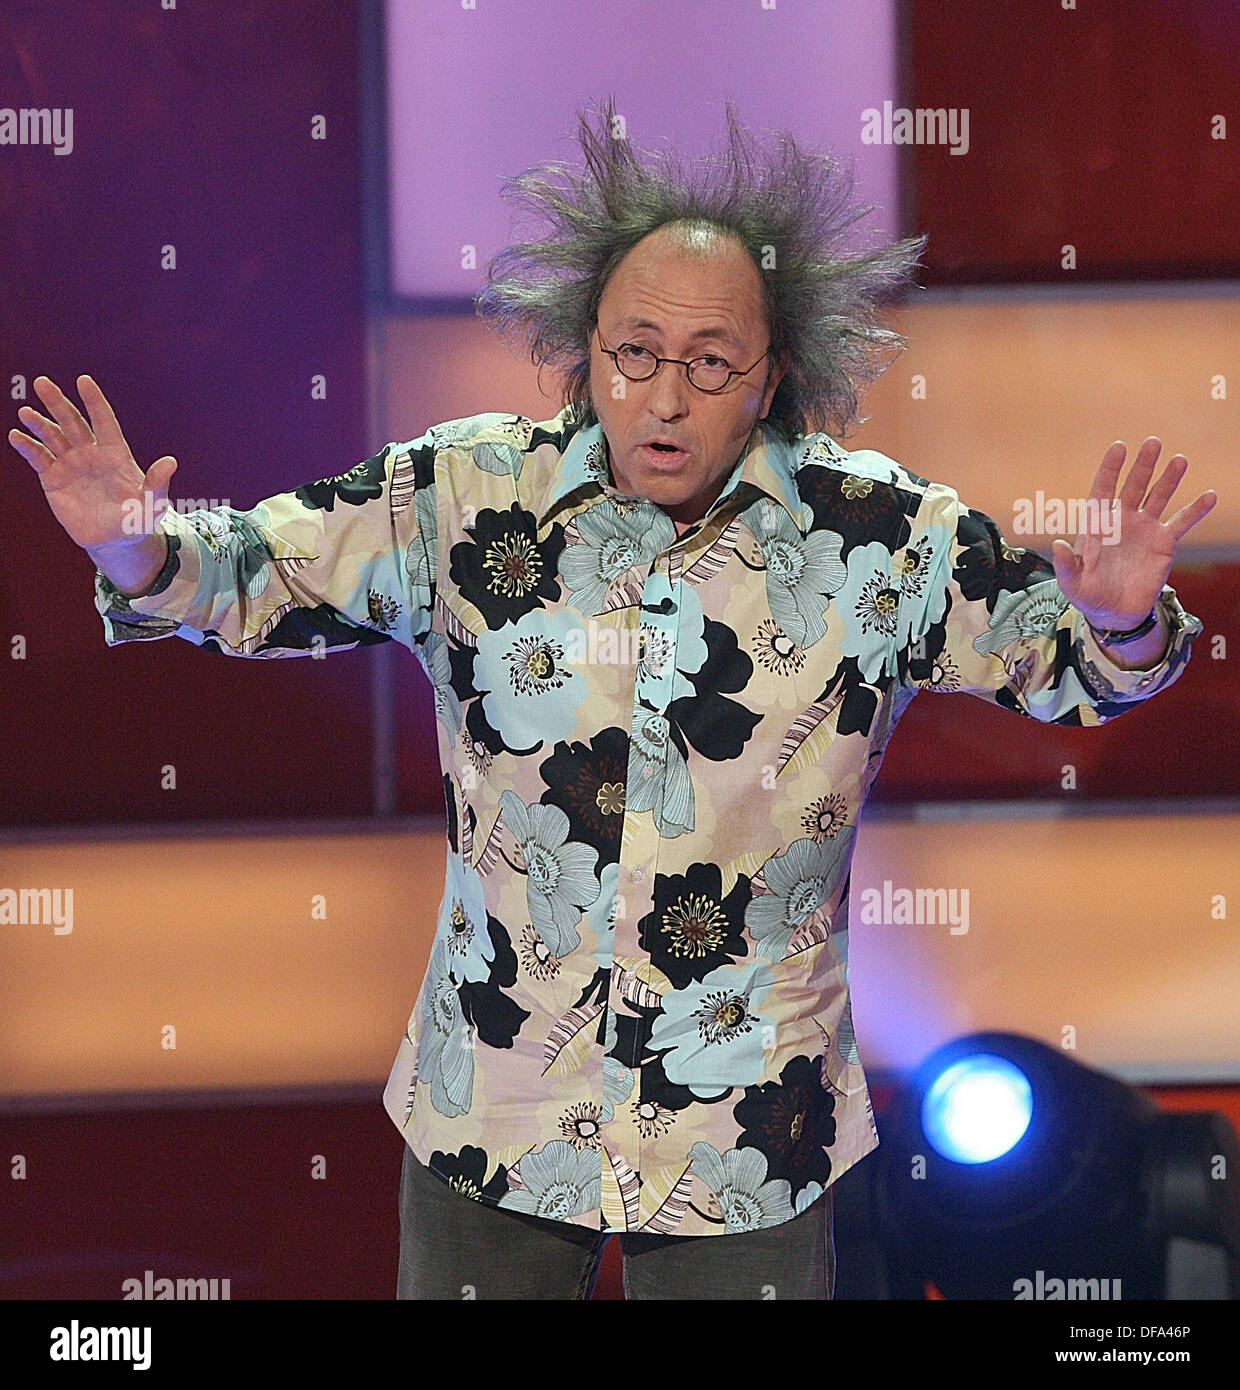 Cabaret artist Urban Priol performs at the ZDF live show 'People 2006' on the 3rd of December in 2006. Stock Photo